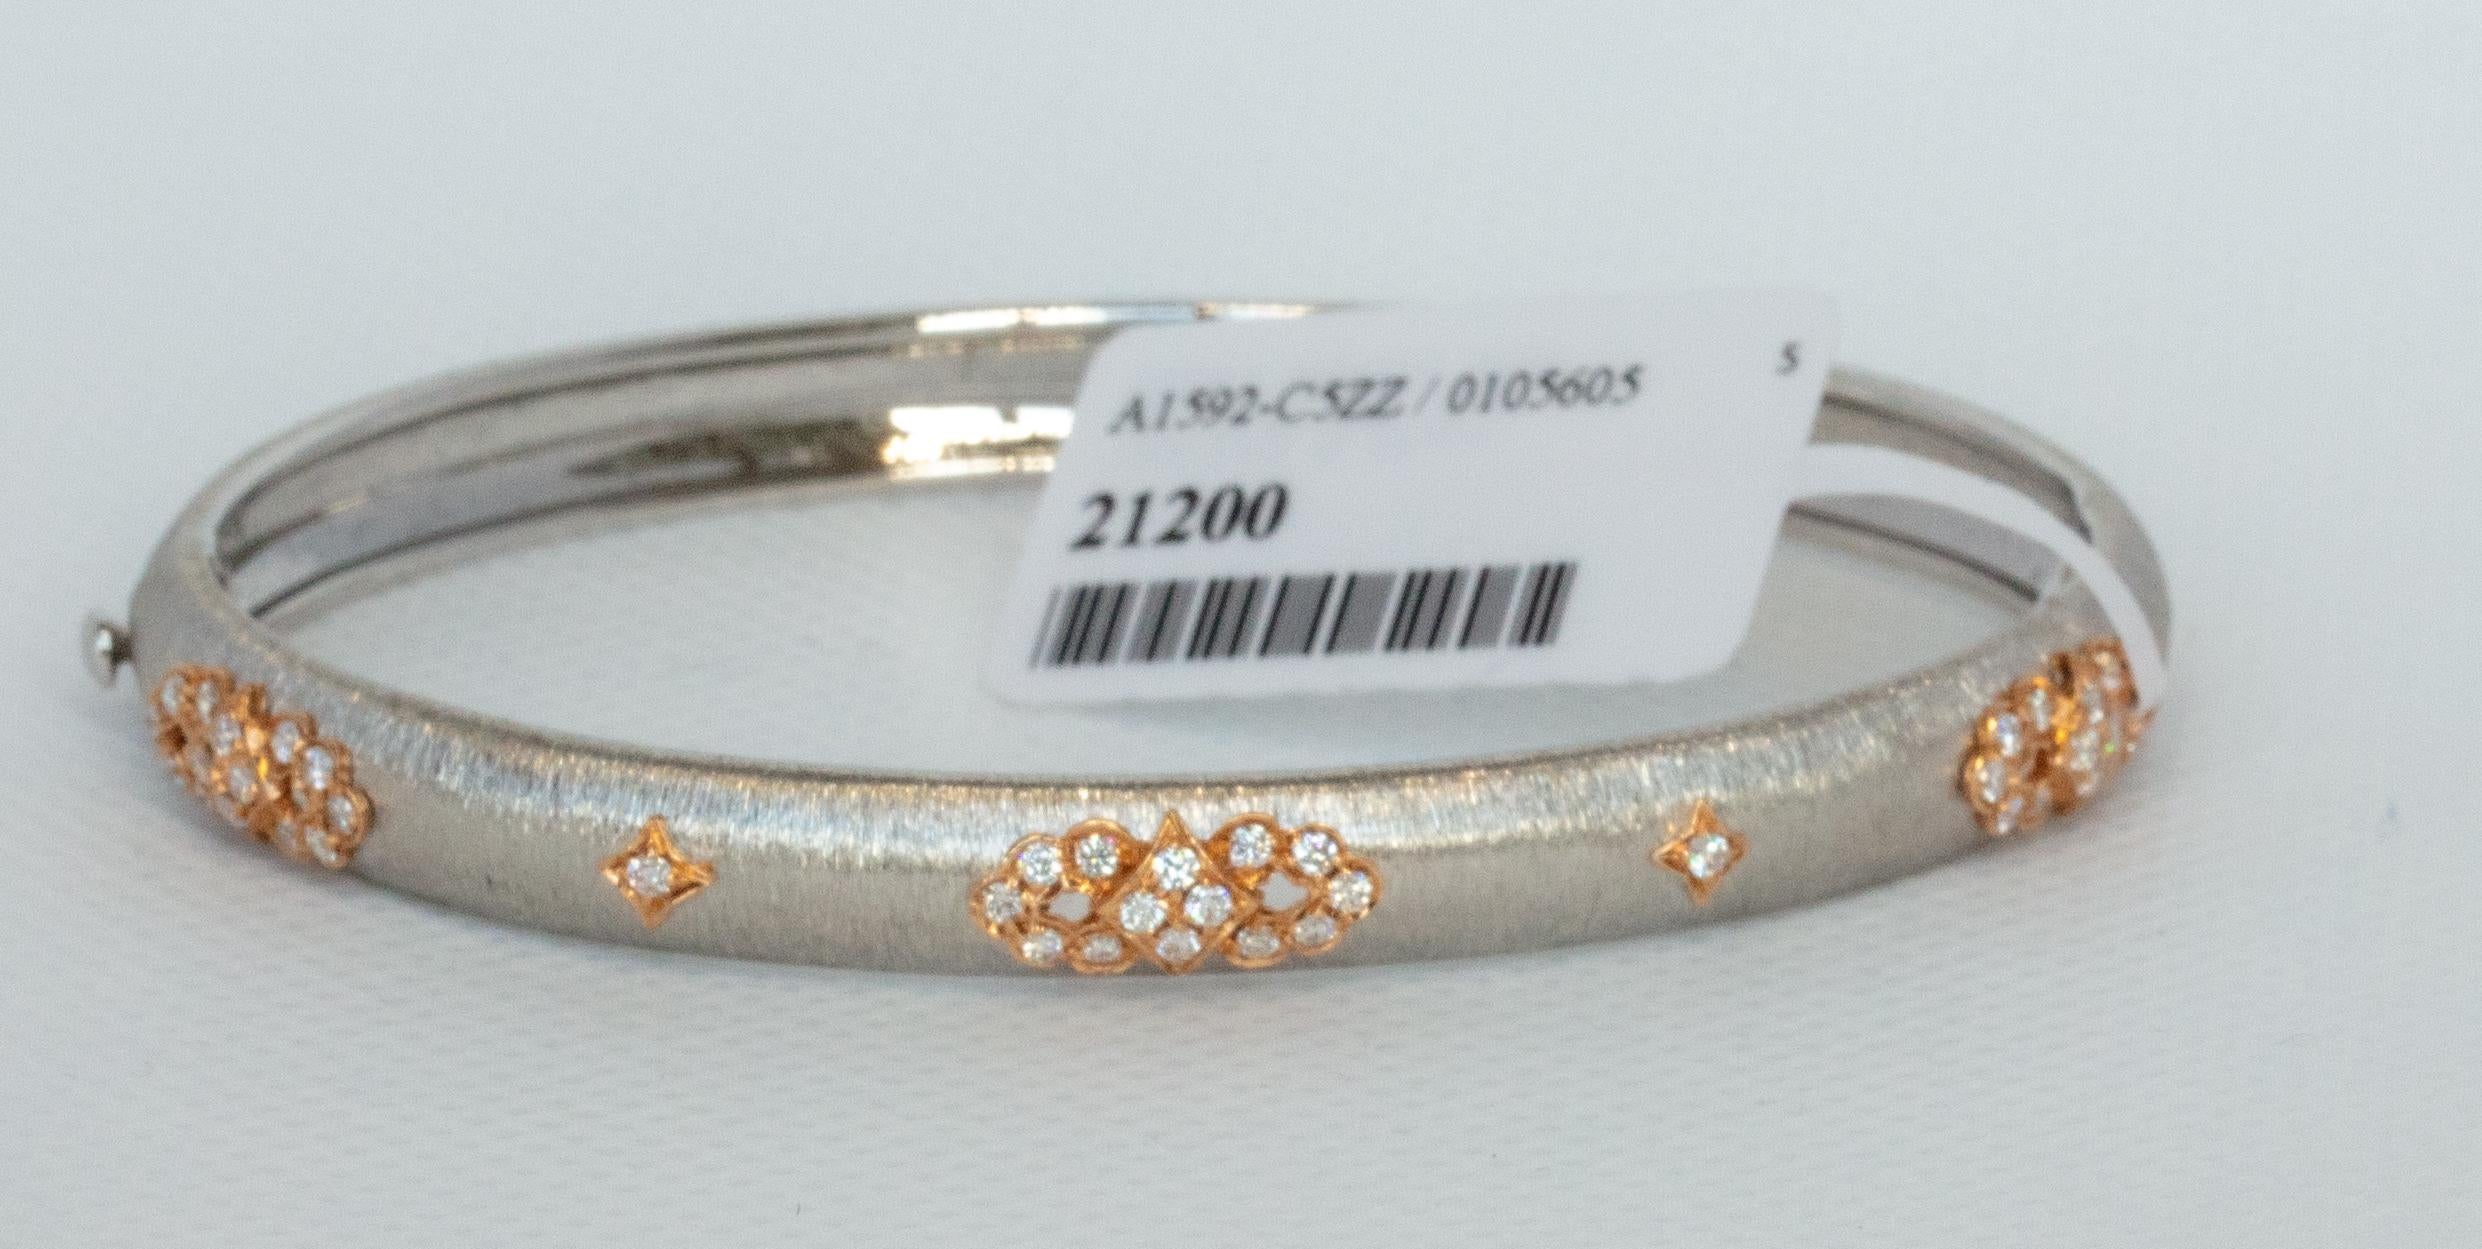 WHITE AND ROSE GOLD BANGLE
44 ROUND DIAMONDS - 0.43cts
18KWR - 9.88 gm
size - 48 x 58 mm (2.28 x 1.89 inch) Other sizes are available upon request, for example, 45x55mm  (1.77x2.17inch)

This unique piece is made using the Florentine exquisite